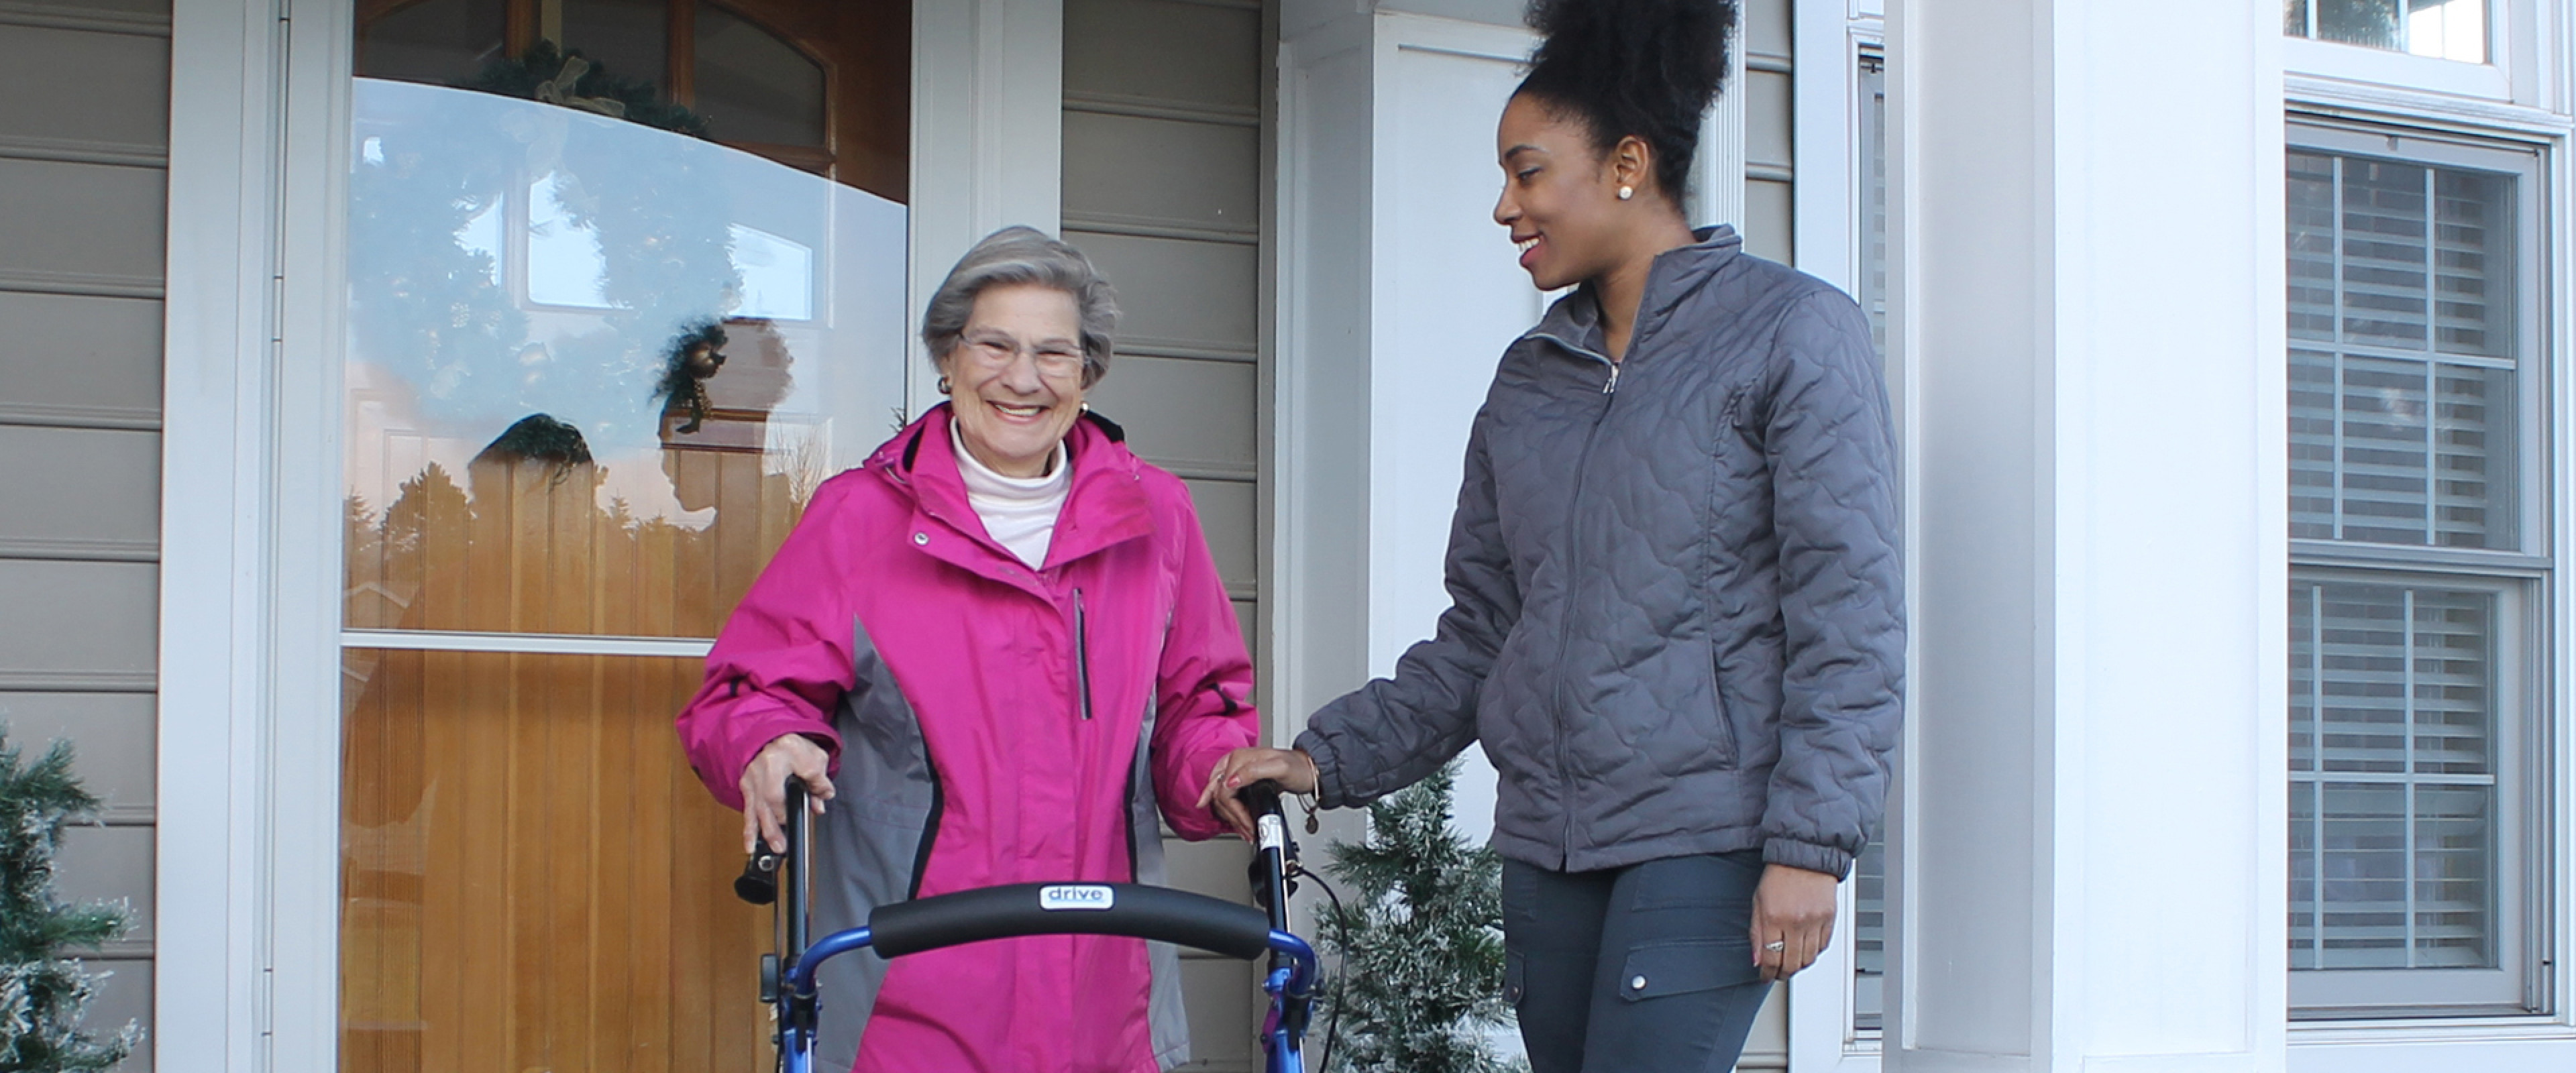 In home care worker helps a senior woman